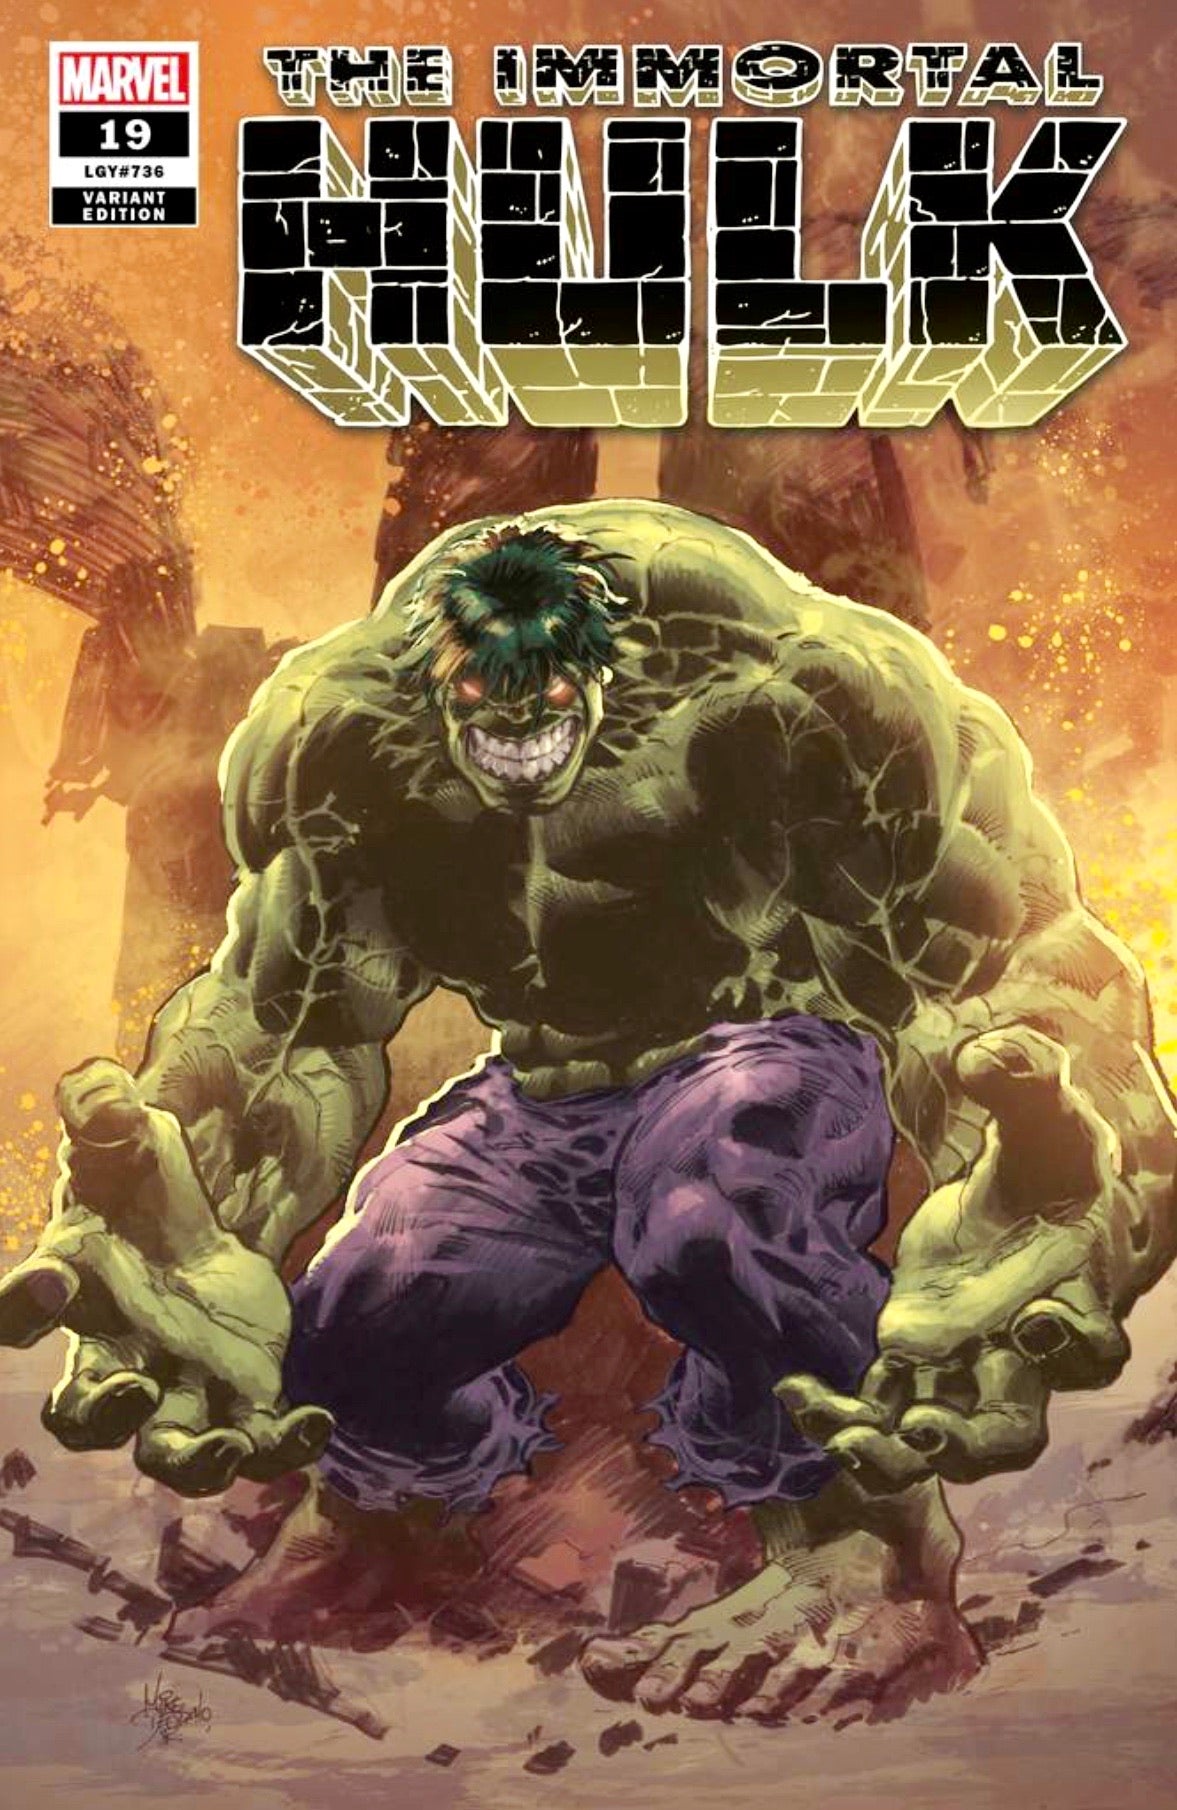 IMMORTAL HULK #19 MIKE DEODATO Exclusive Cover A Limited To 3000